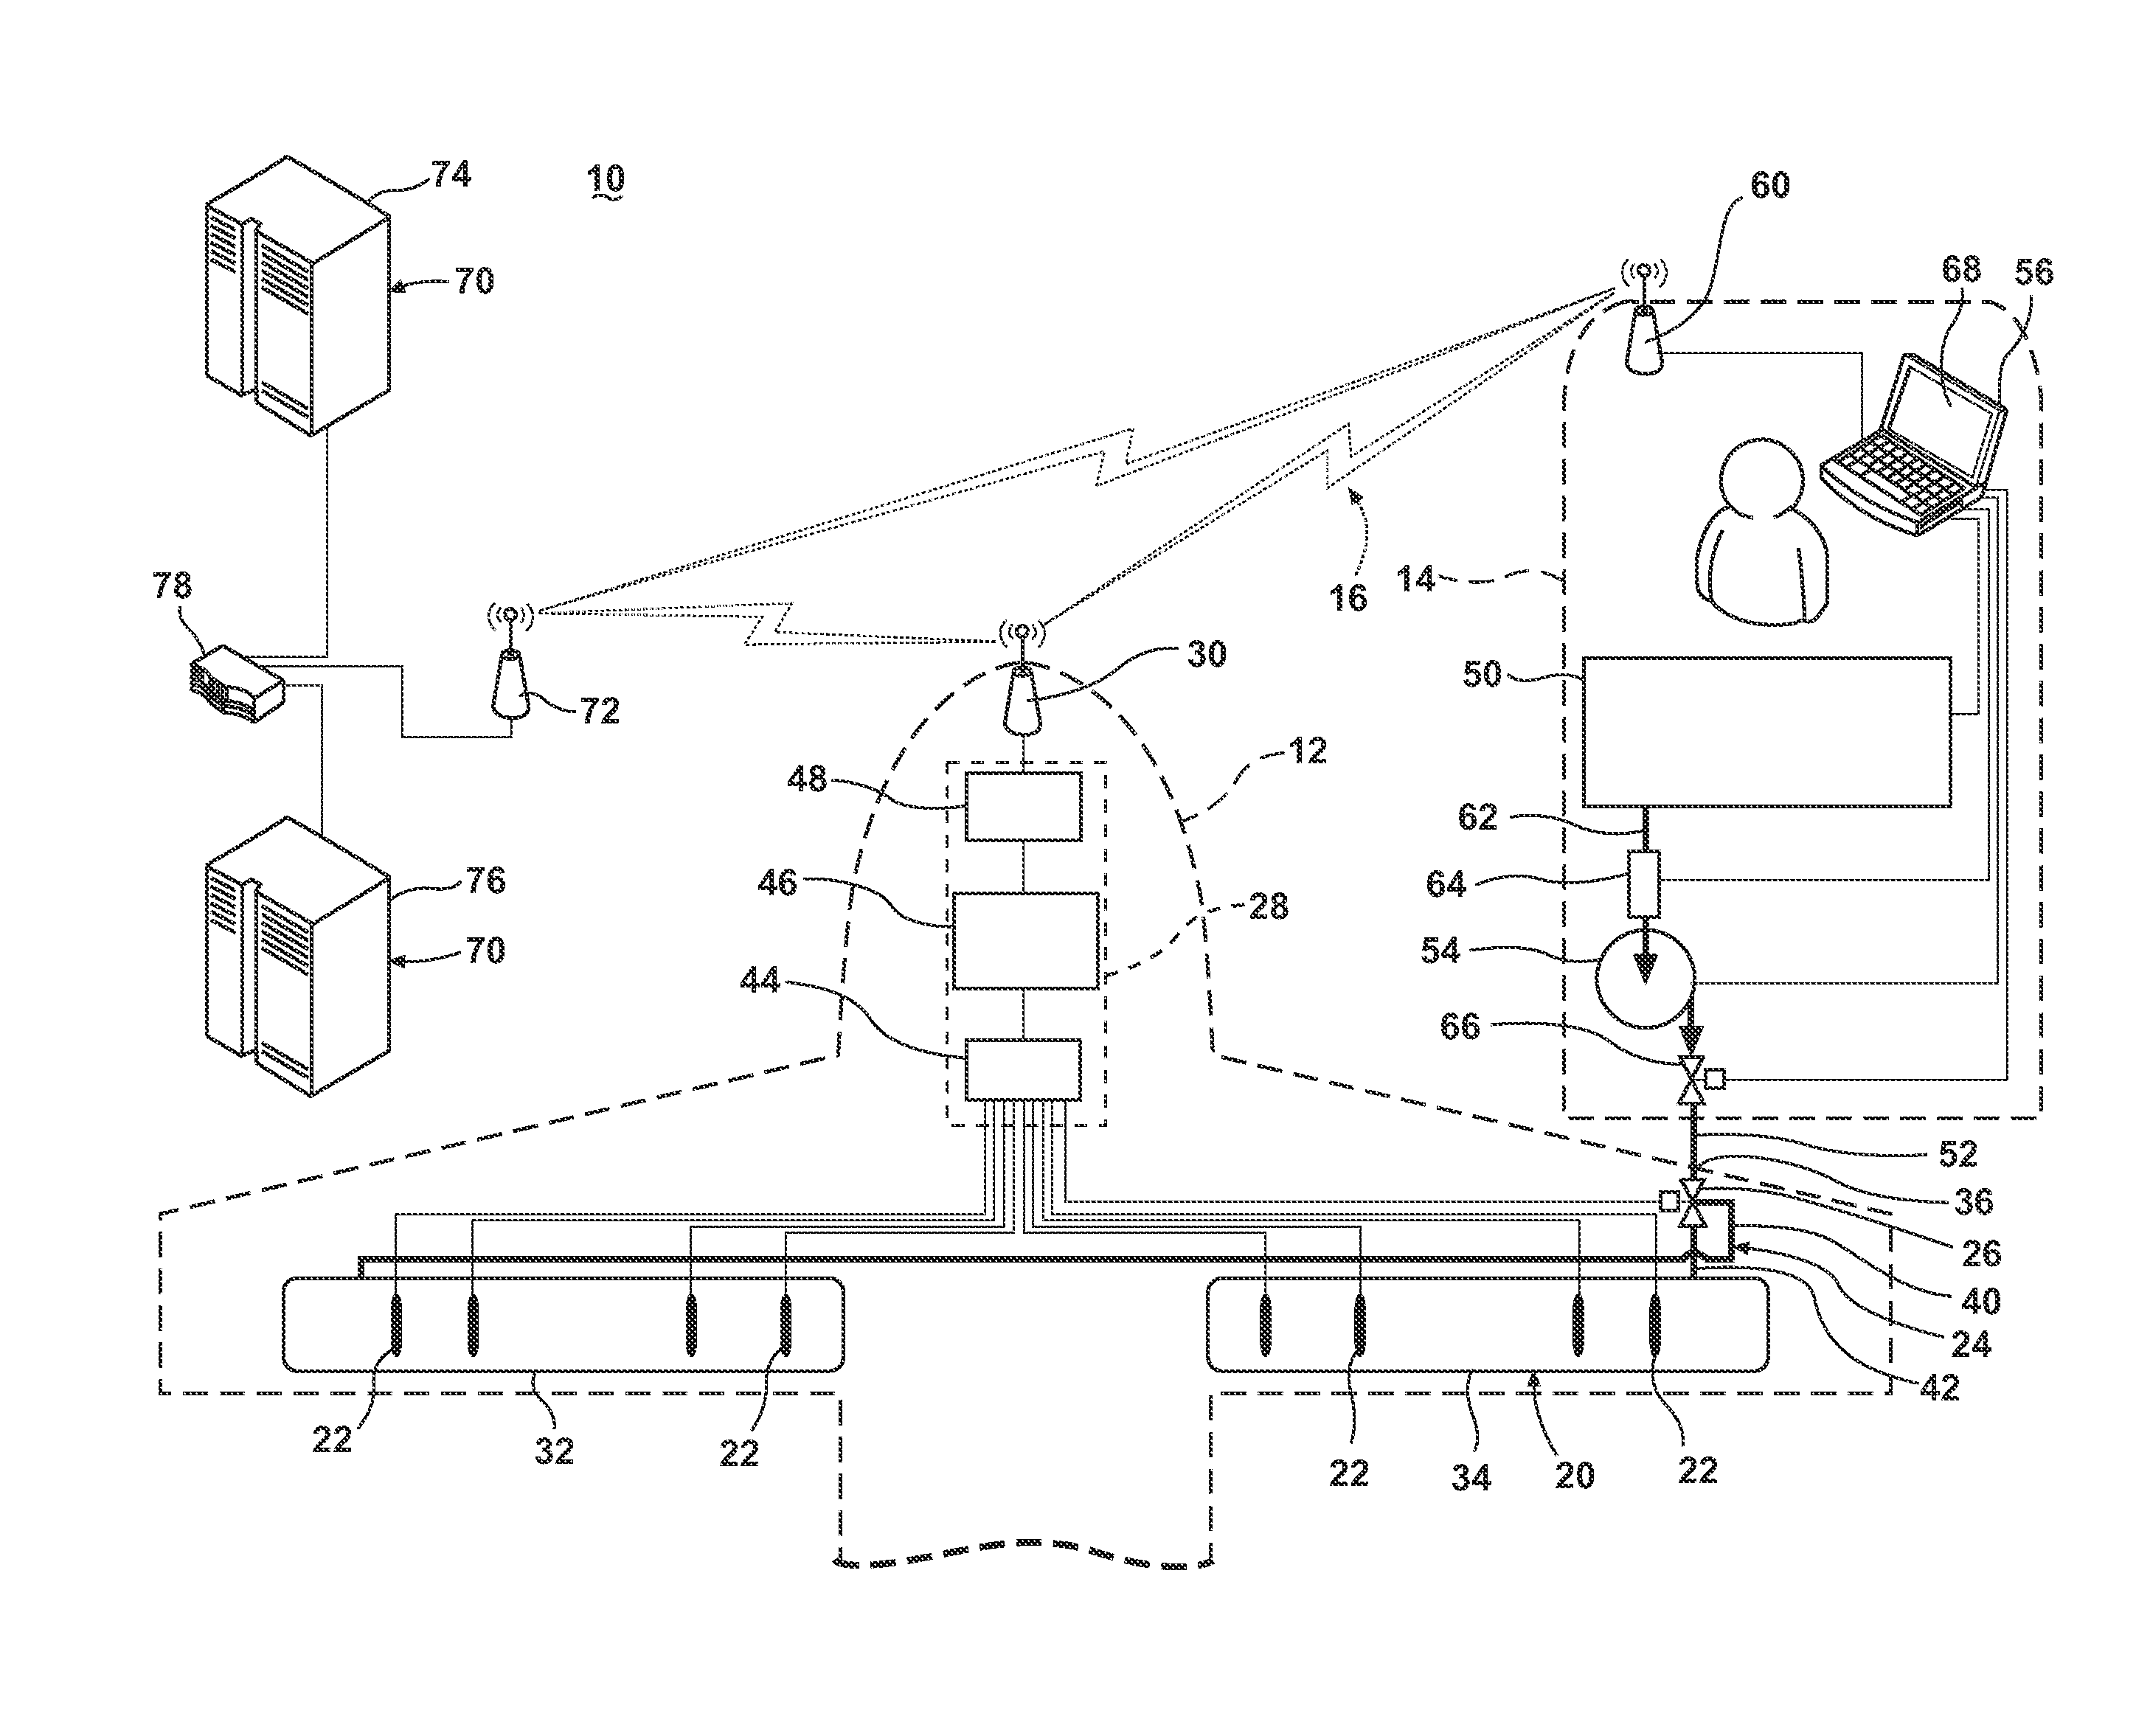 System for wireless refueling of an aircraft